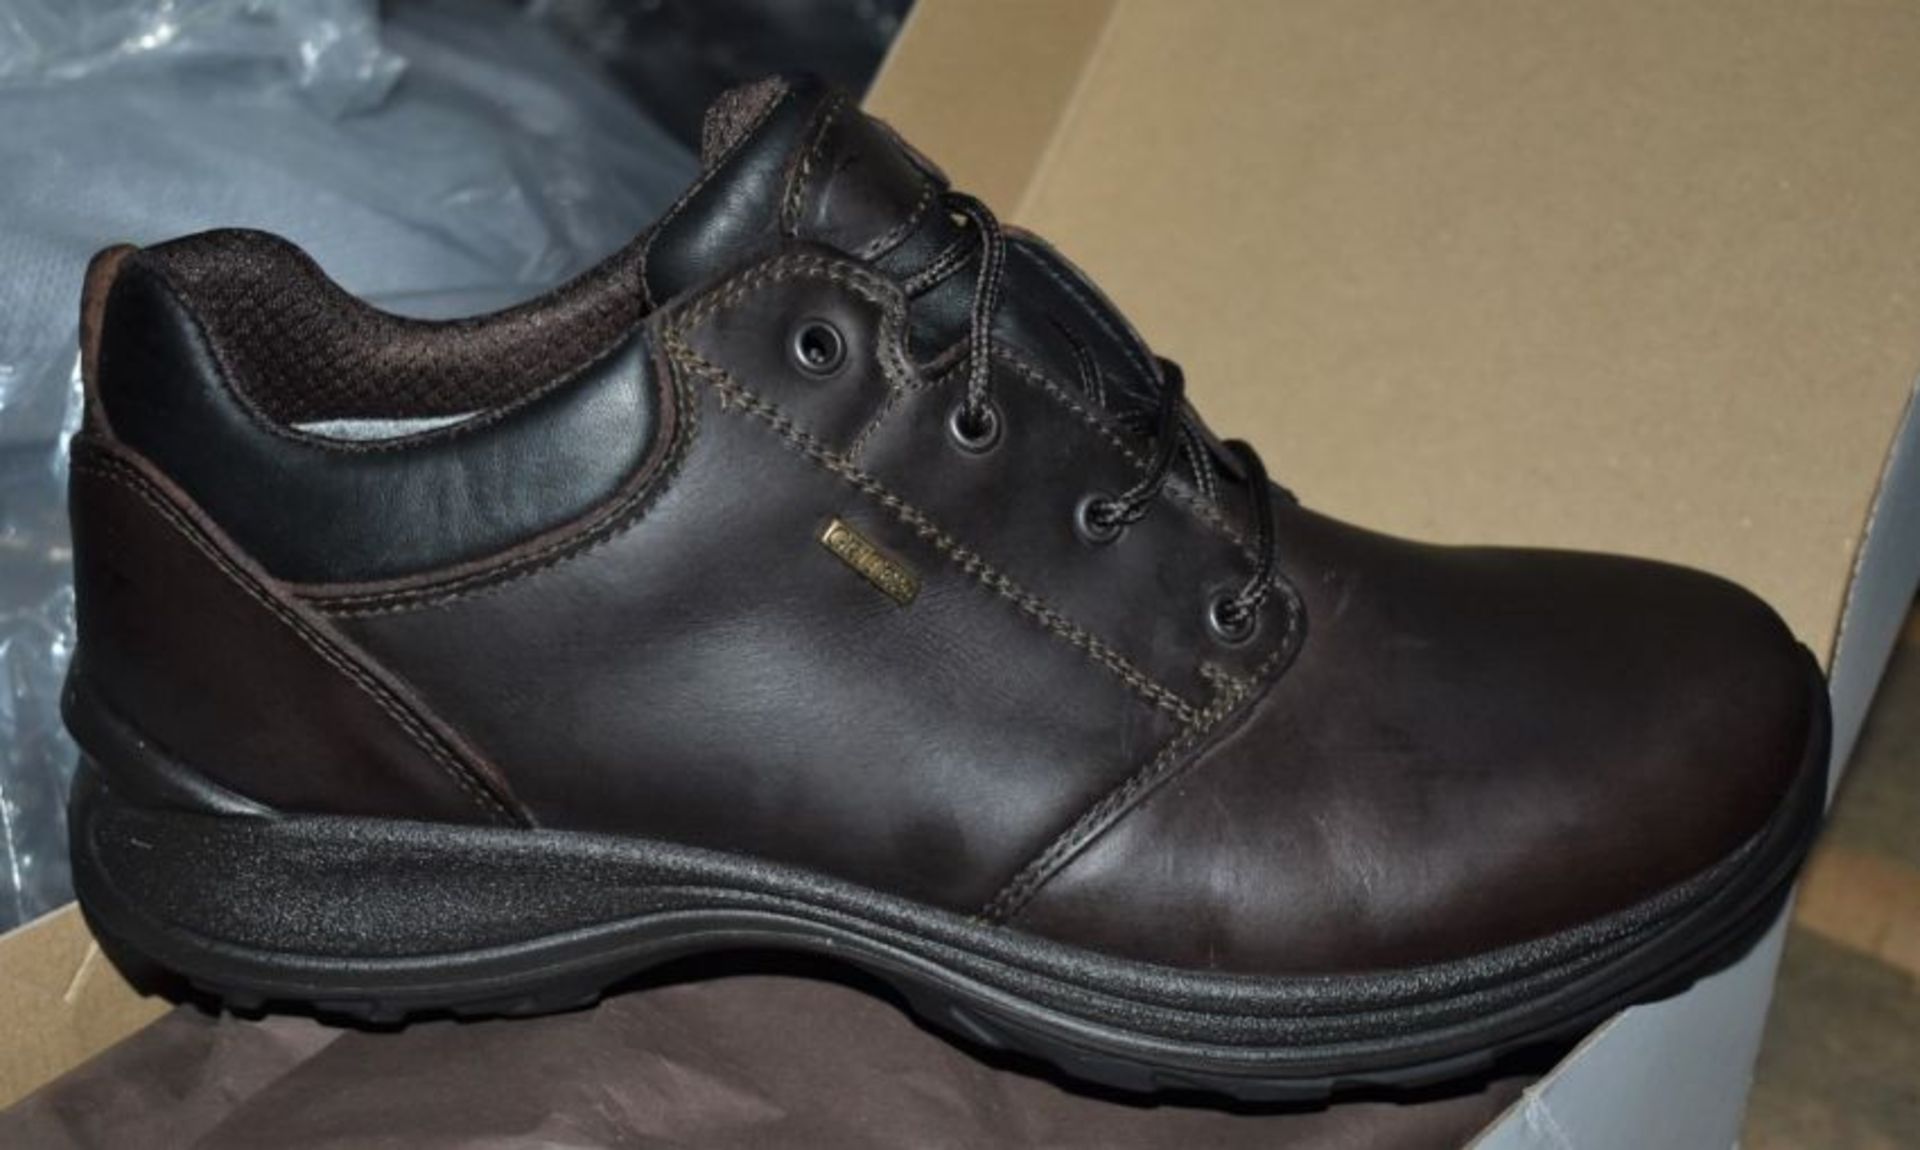 1 x Pair of Men's Grisport Brown Leather GriTex Shoes - Rogerson Footwear - Brand New and Boxed - - Image 5 of 5